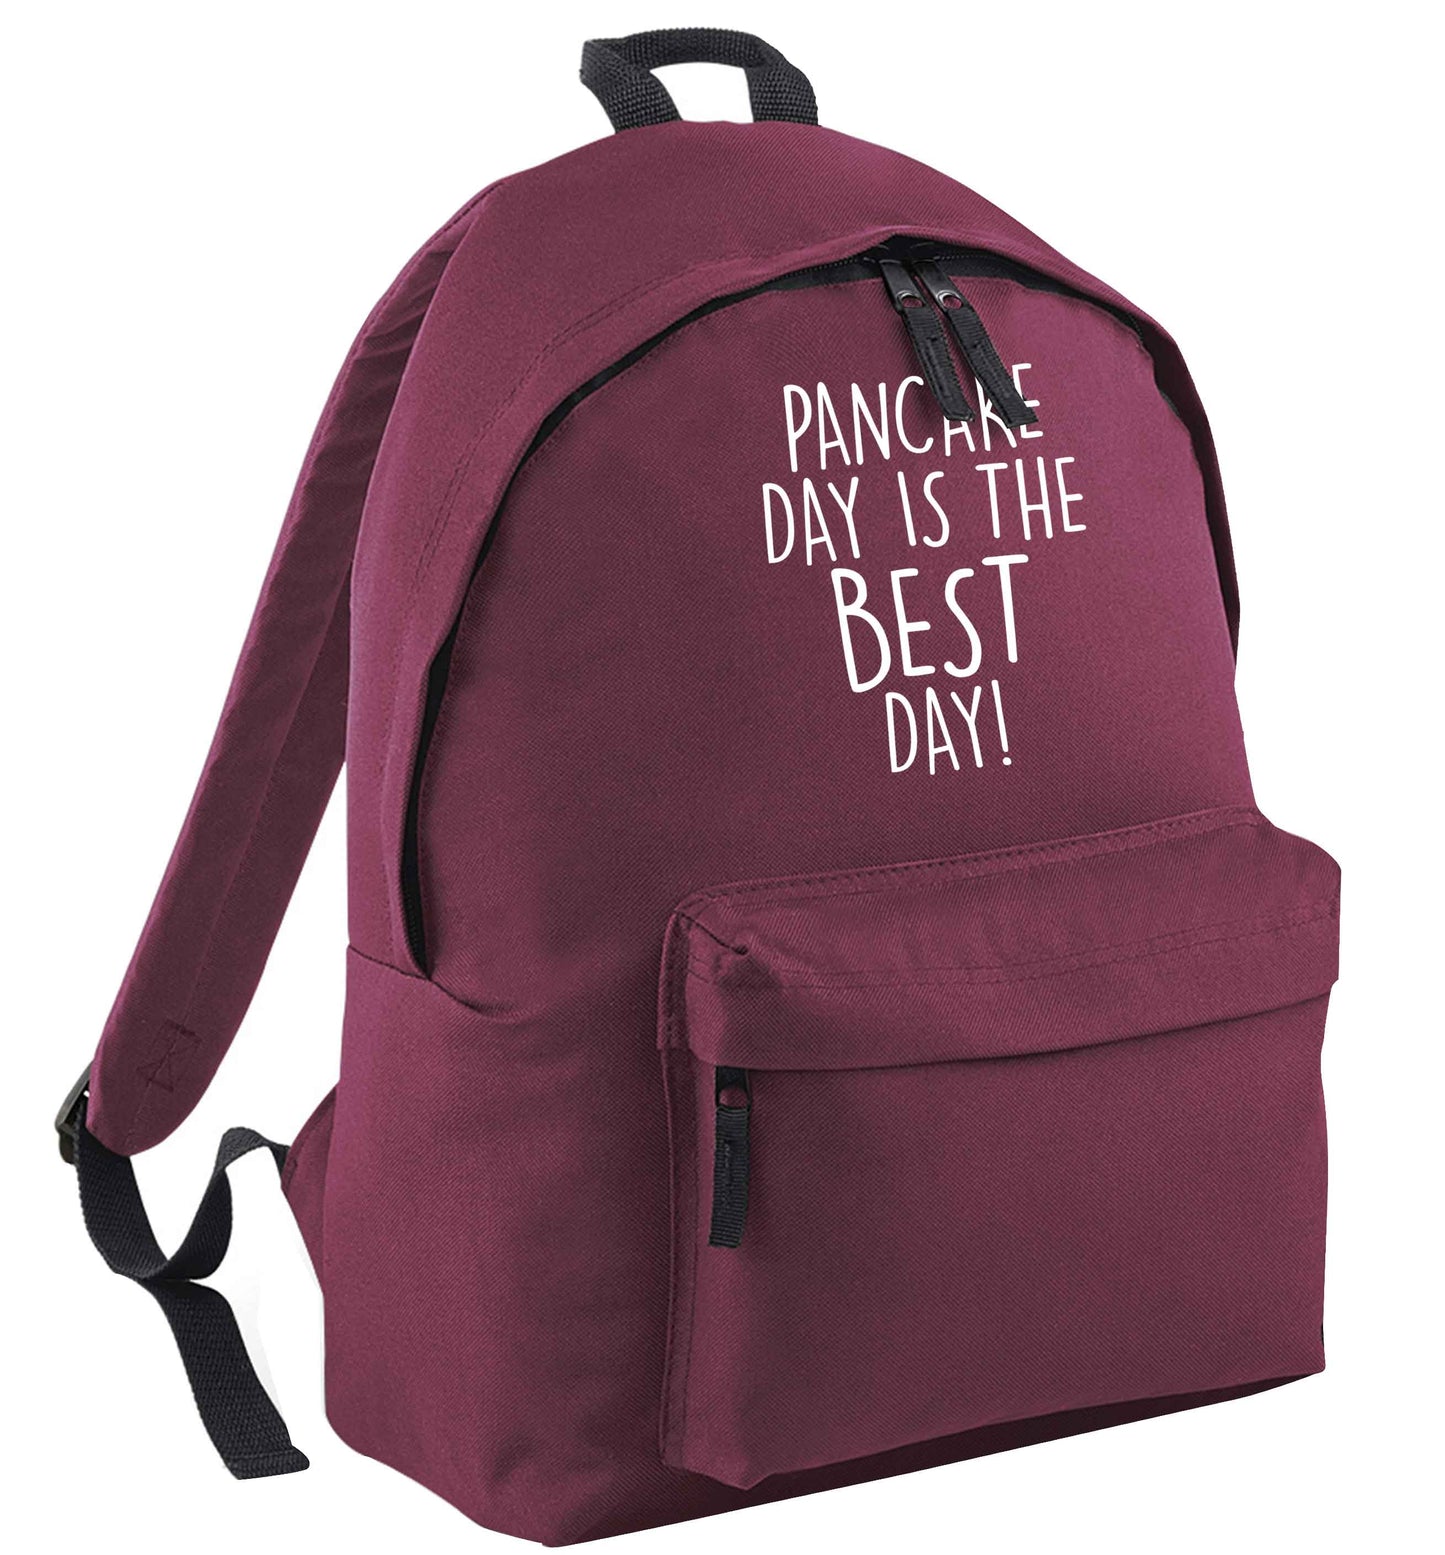 Pancake day is the best day black childrens backpack